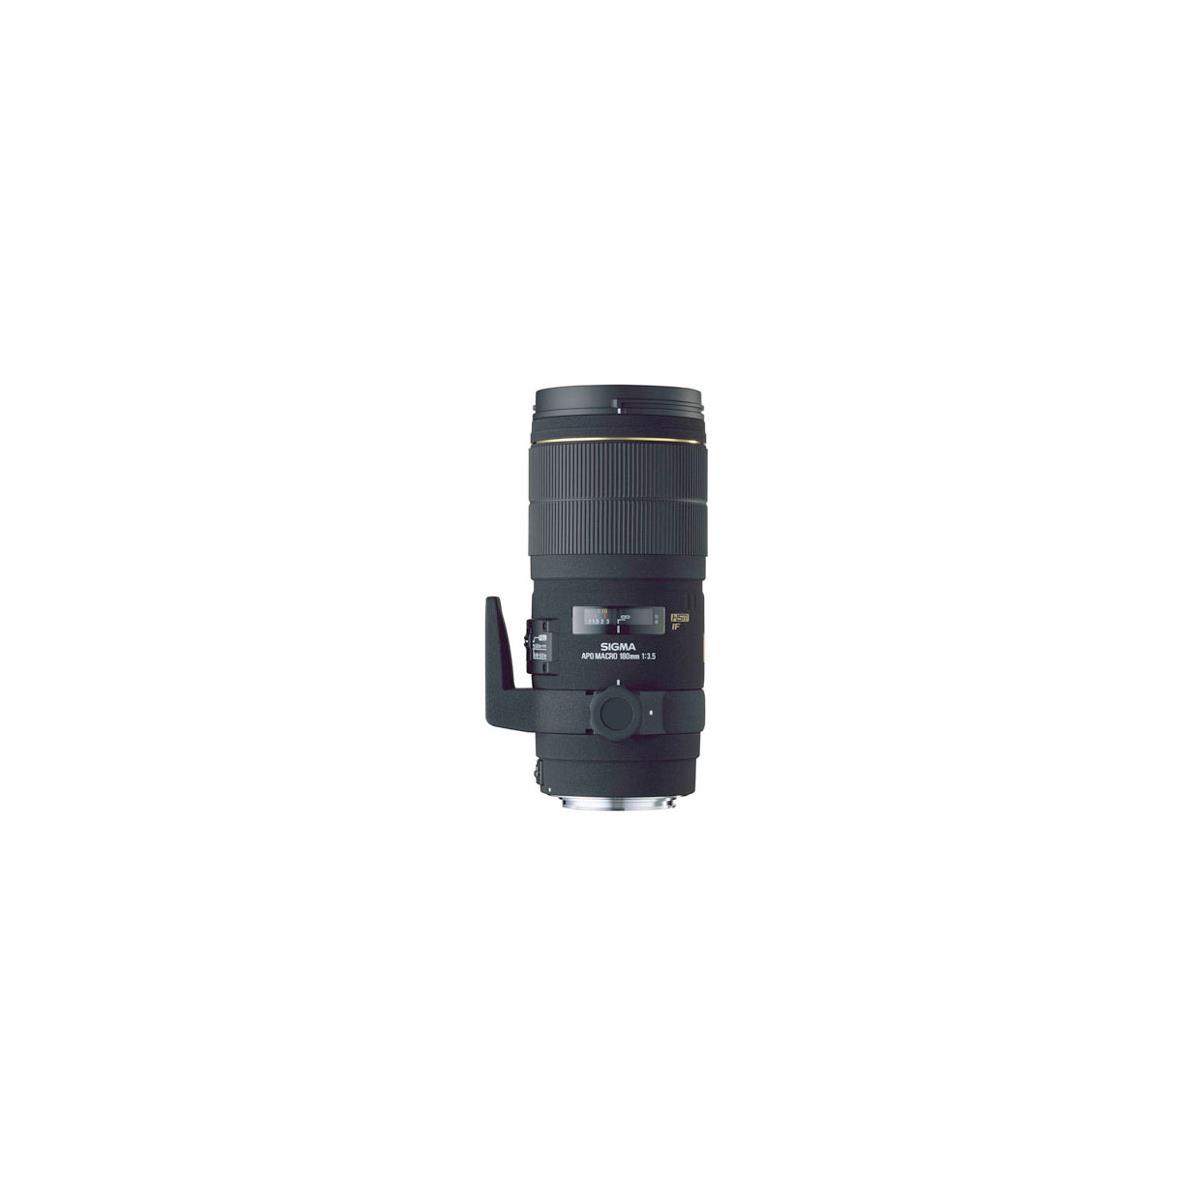 Image of Sigma 105101 180mm AF Lens with Hood for Canon Cameras